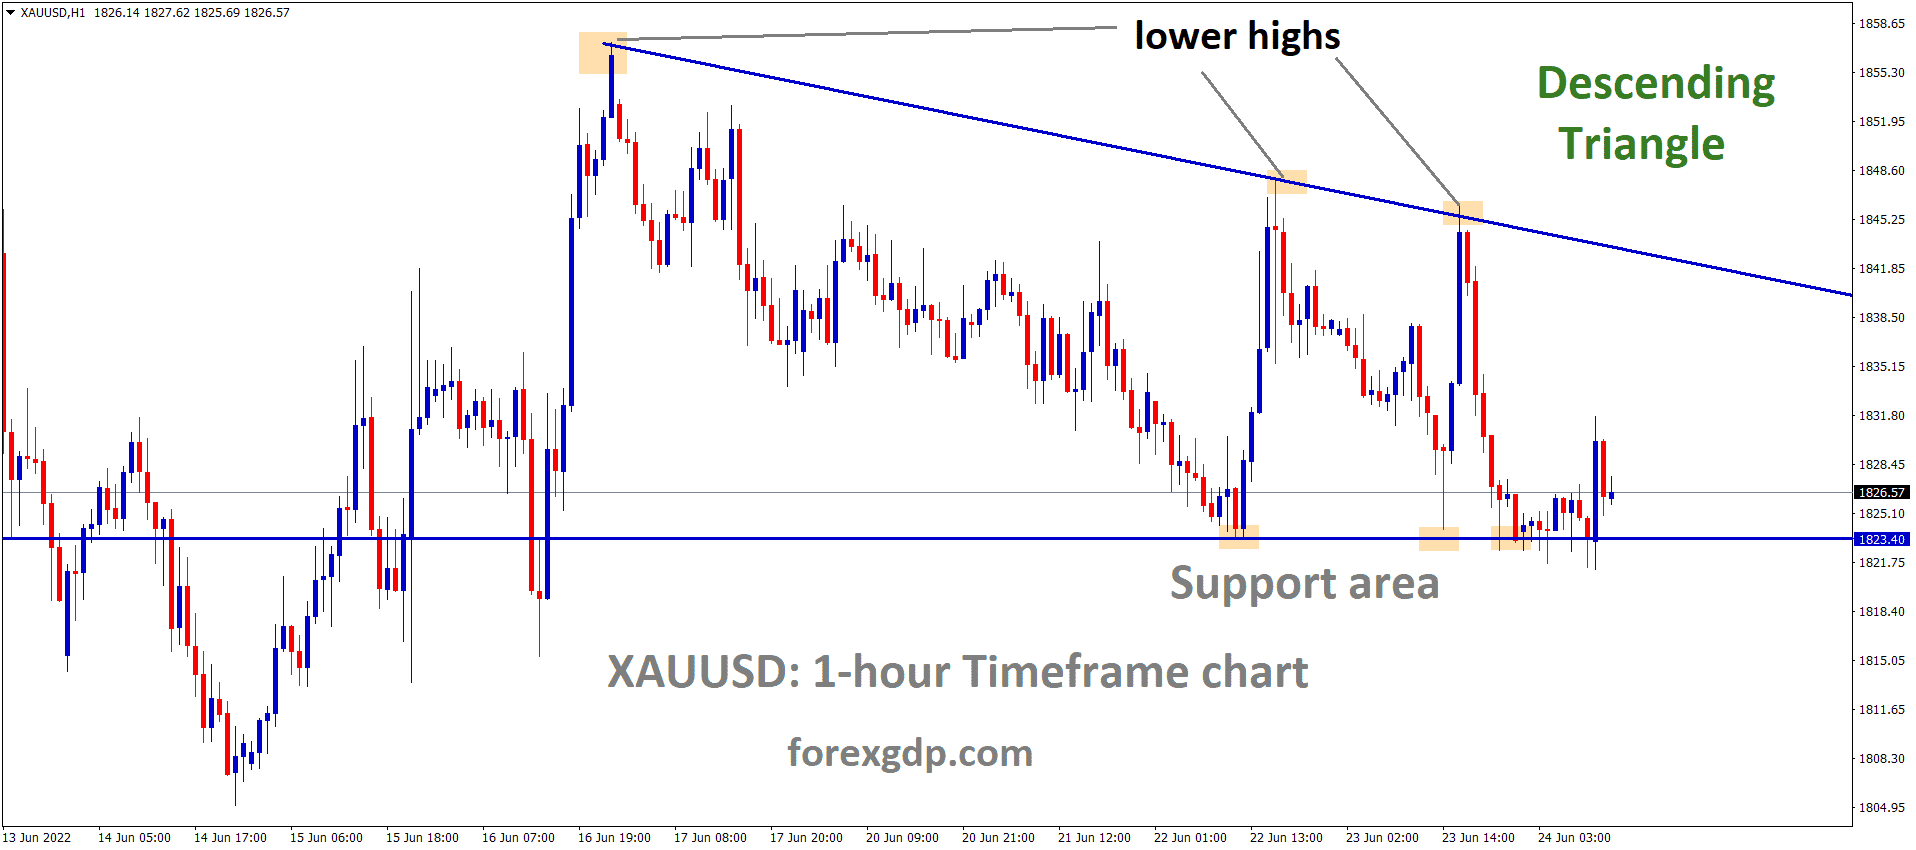 XAUUSD Gold price is moving in the Descending triangle pattern and the Market has rebounded from the Horizontal support area of the Pattern.